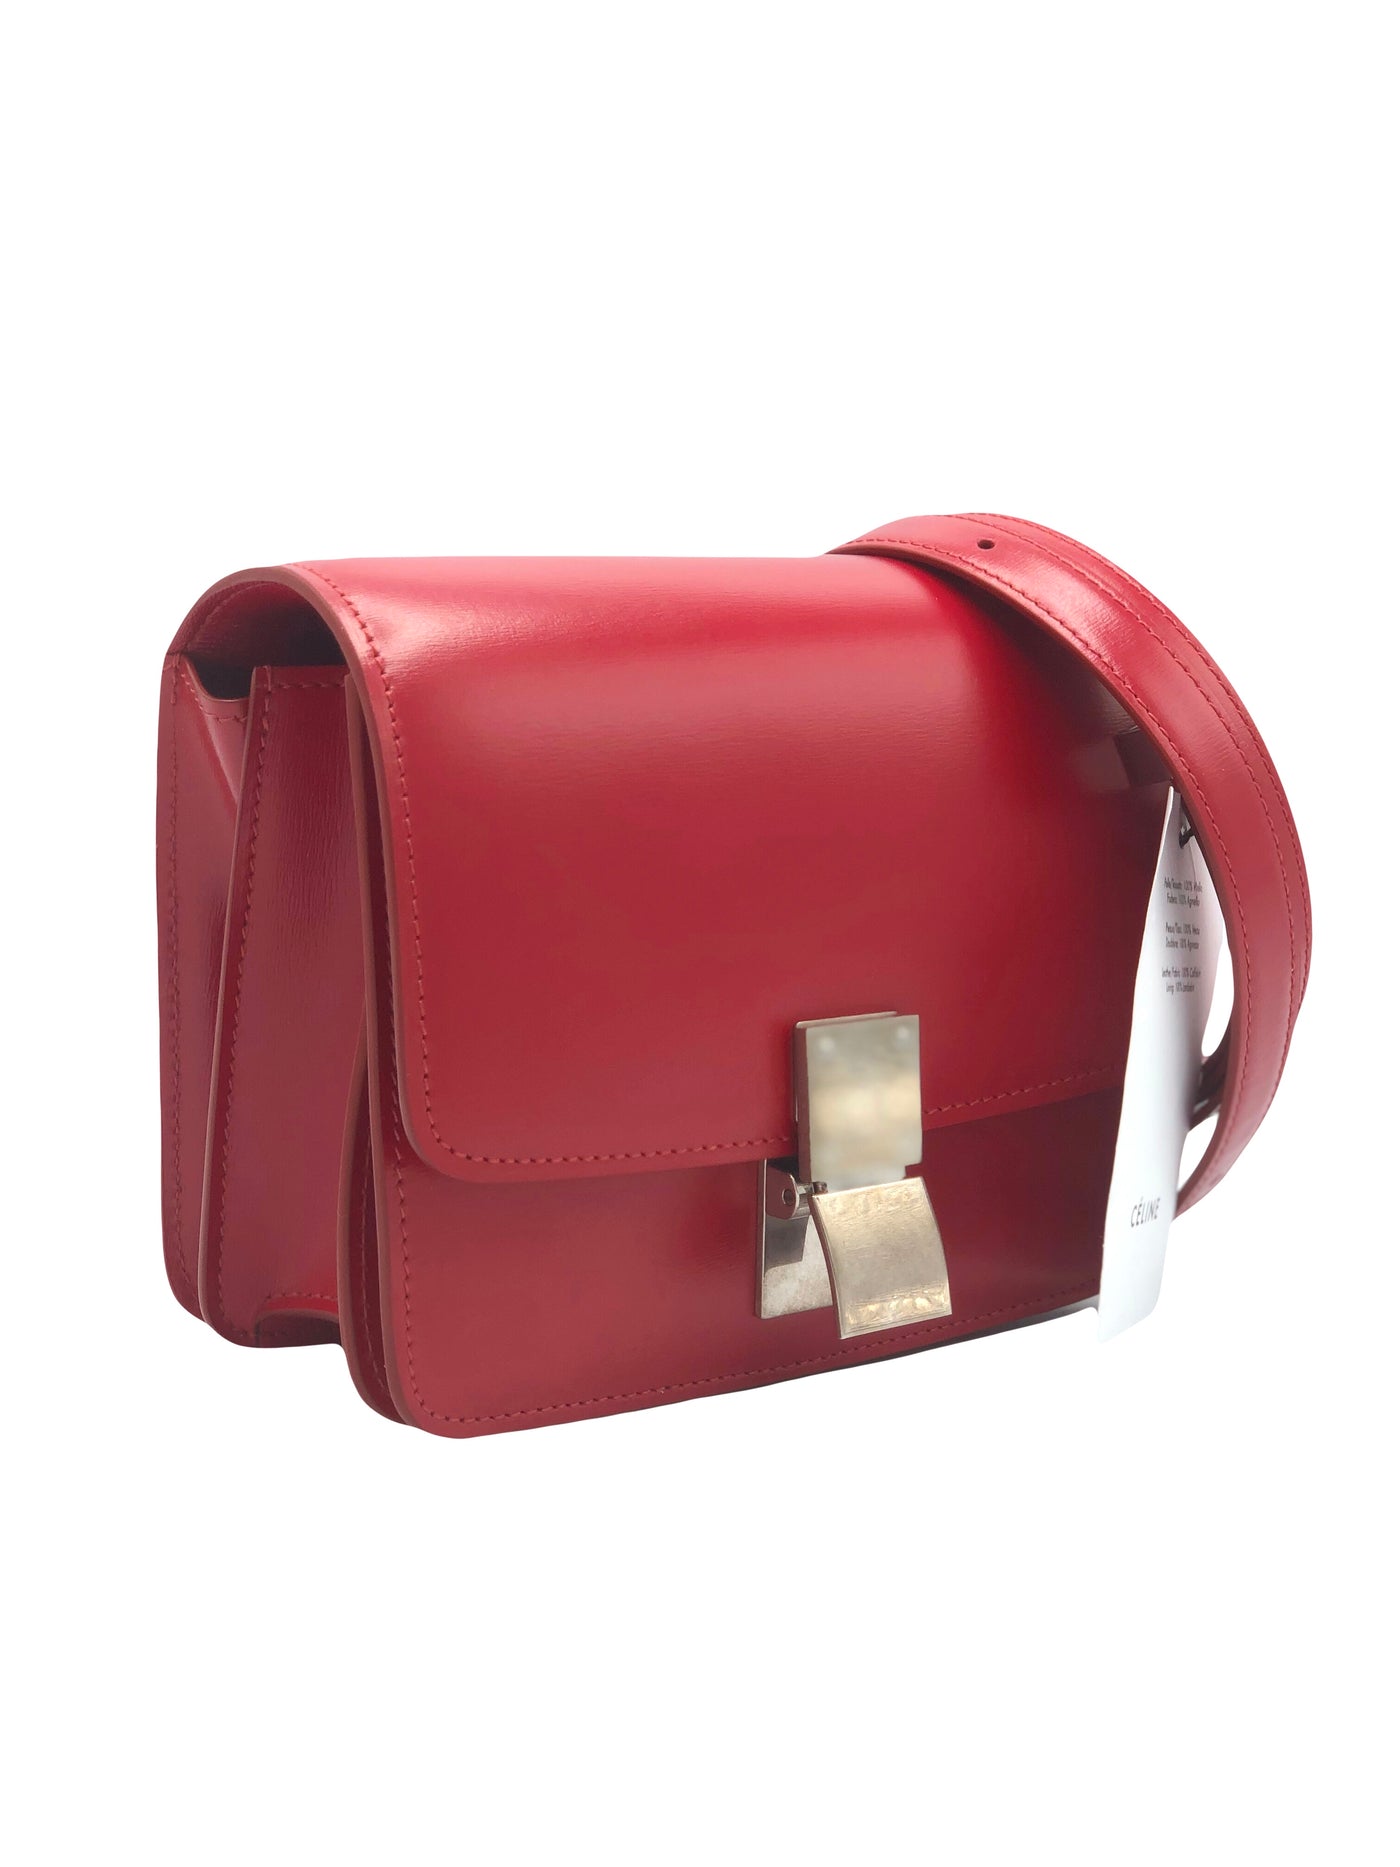 CELINE small red classic box calf handbag * New with label attached * RRP: £2550